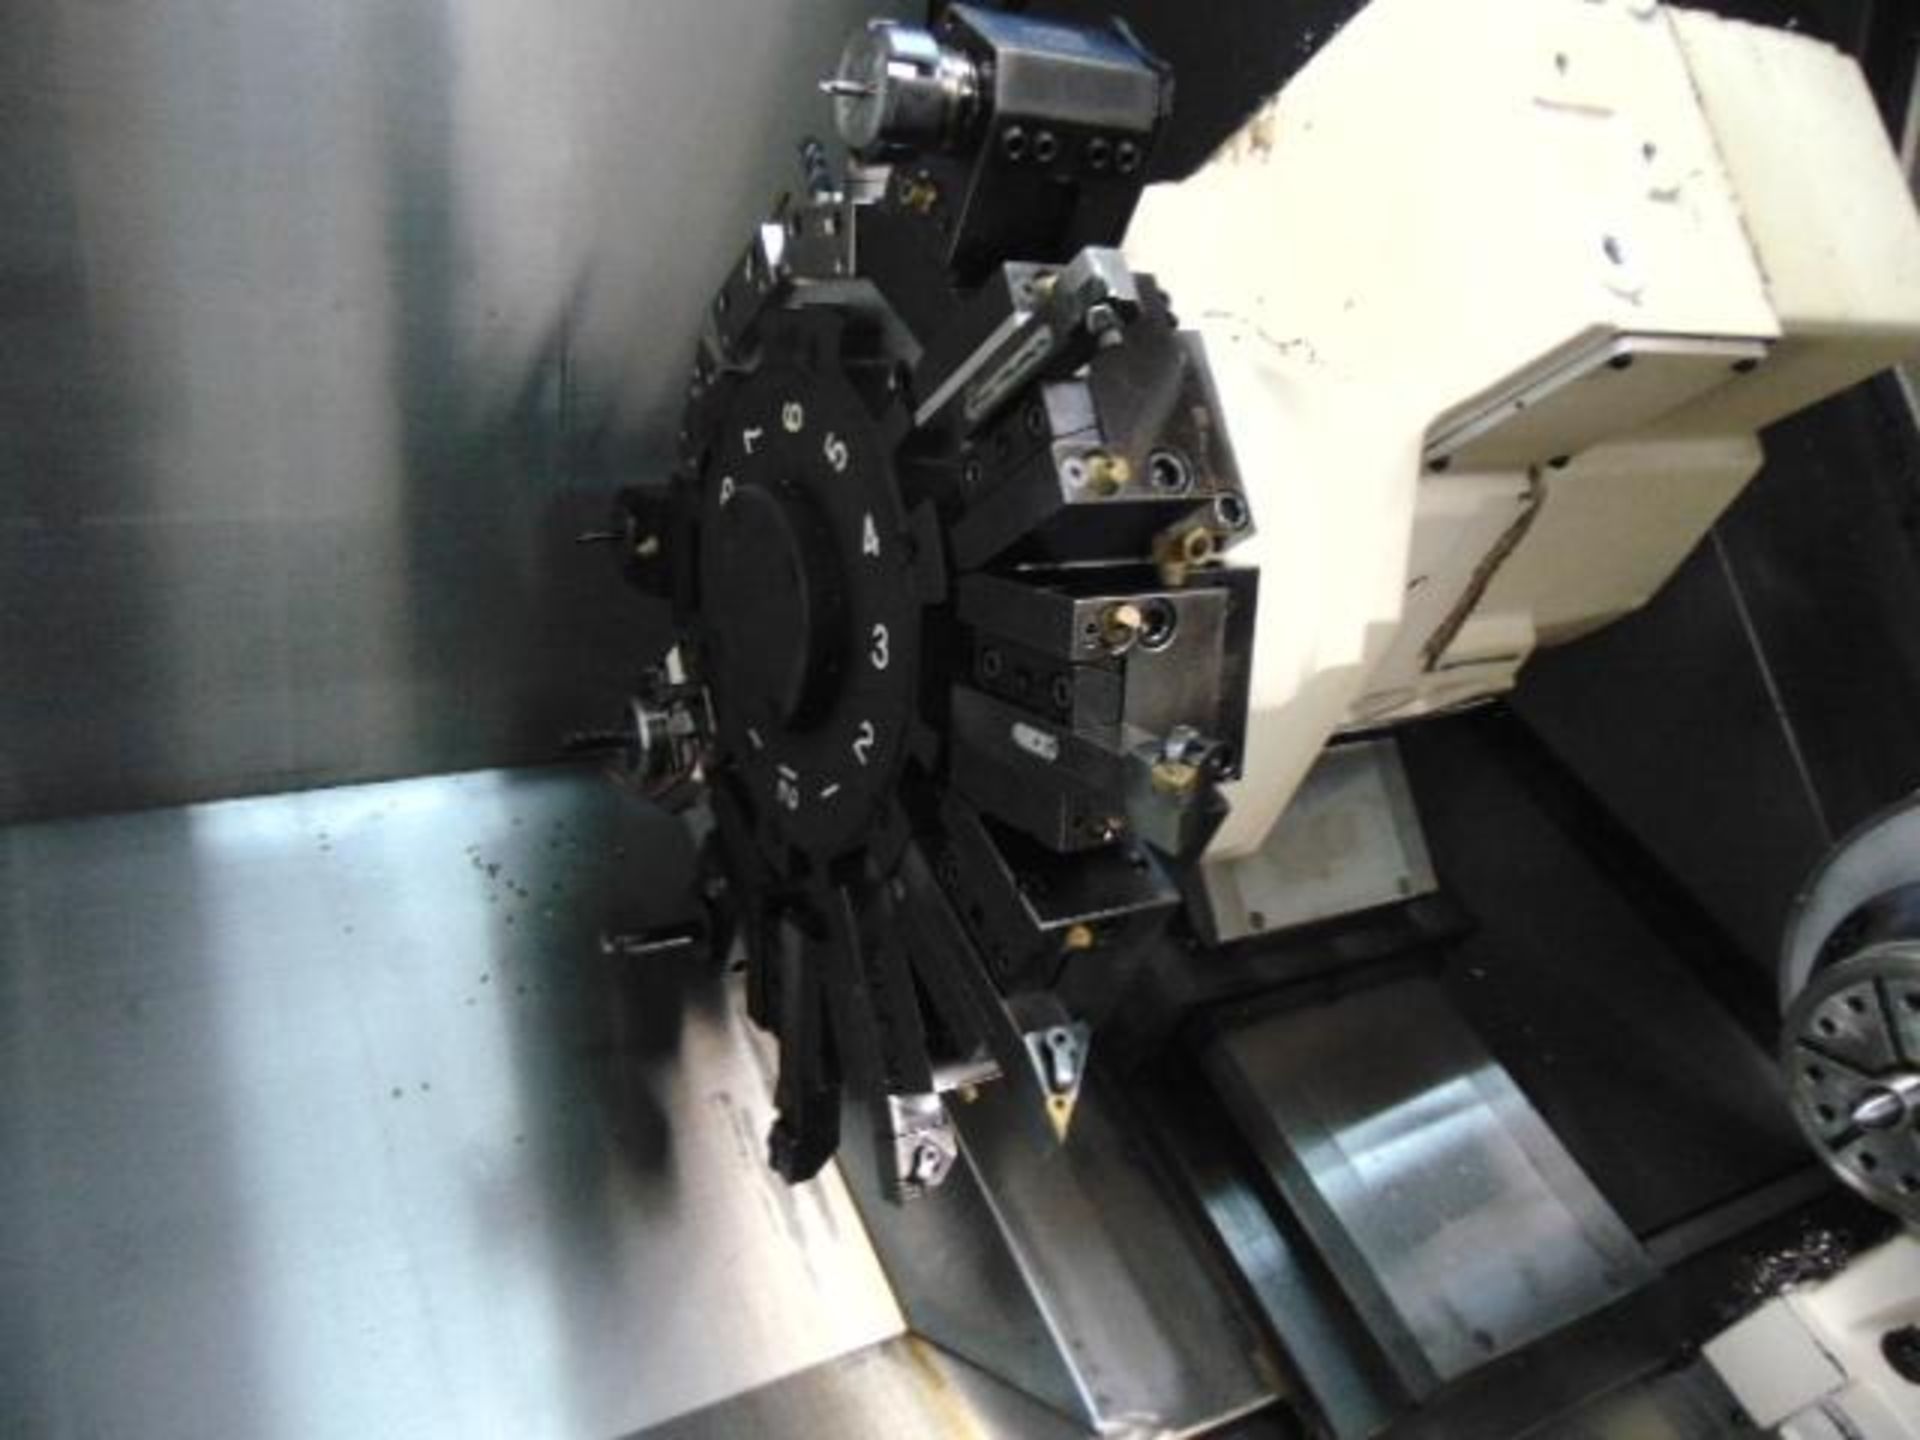 MULTI-AXIS CNC TURNING CENTER, OKUMA MDL. LB3000EXII-MYW 800 SPACE TURN, new 2015, 0SP-P300L CNC con - Image 4 of 24